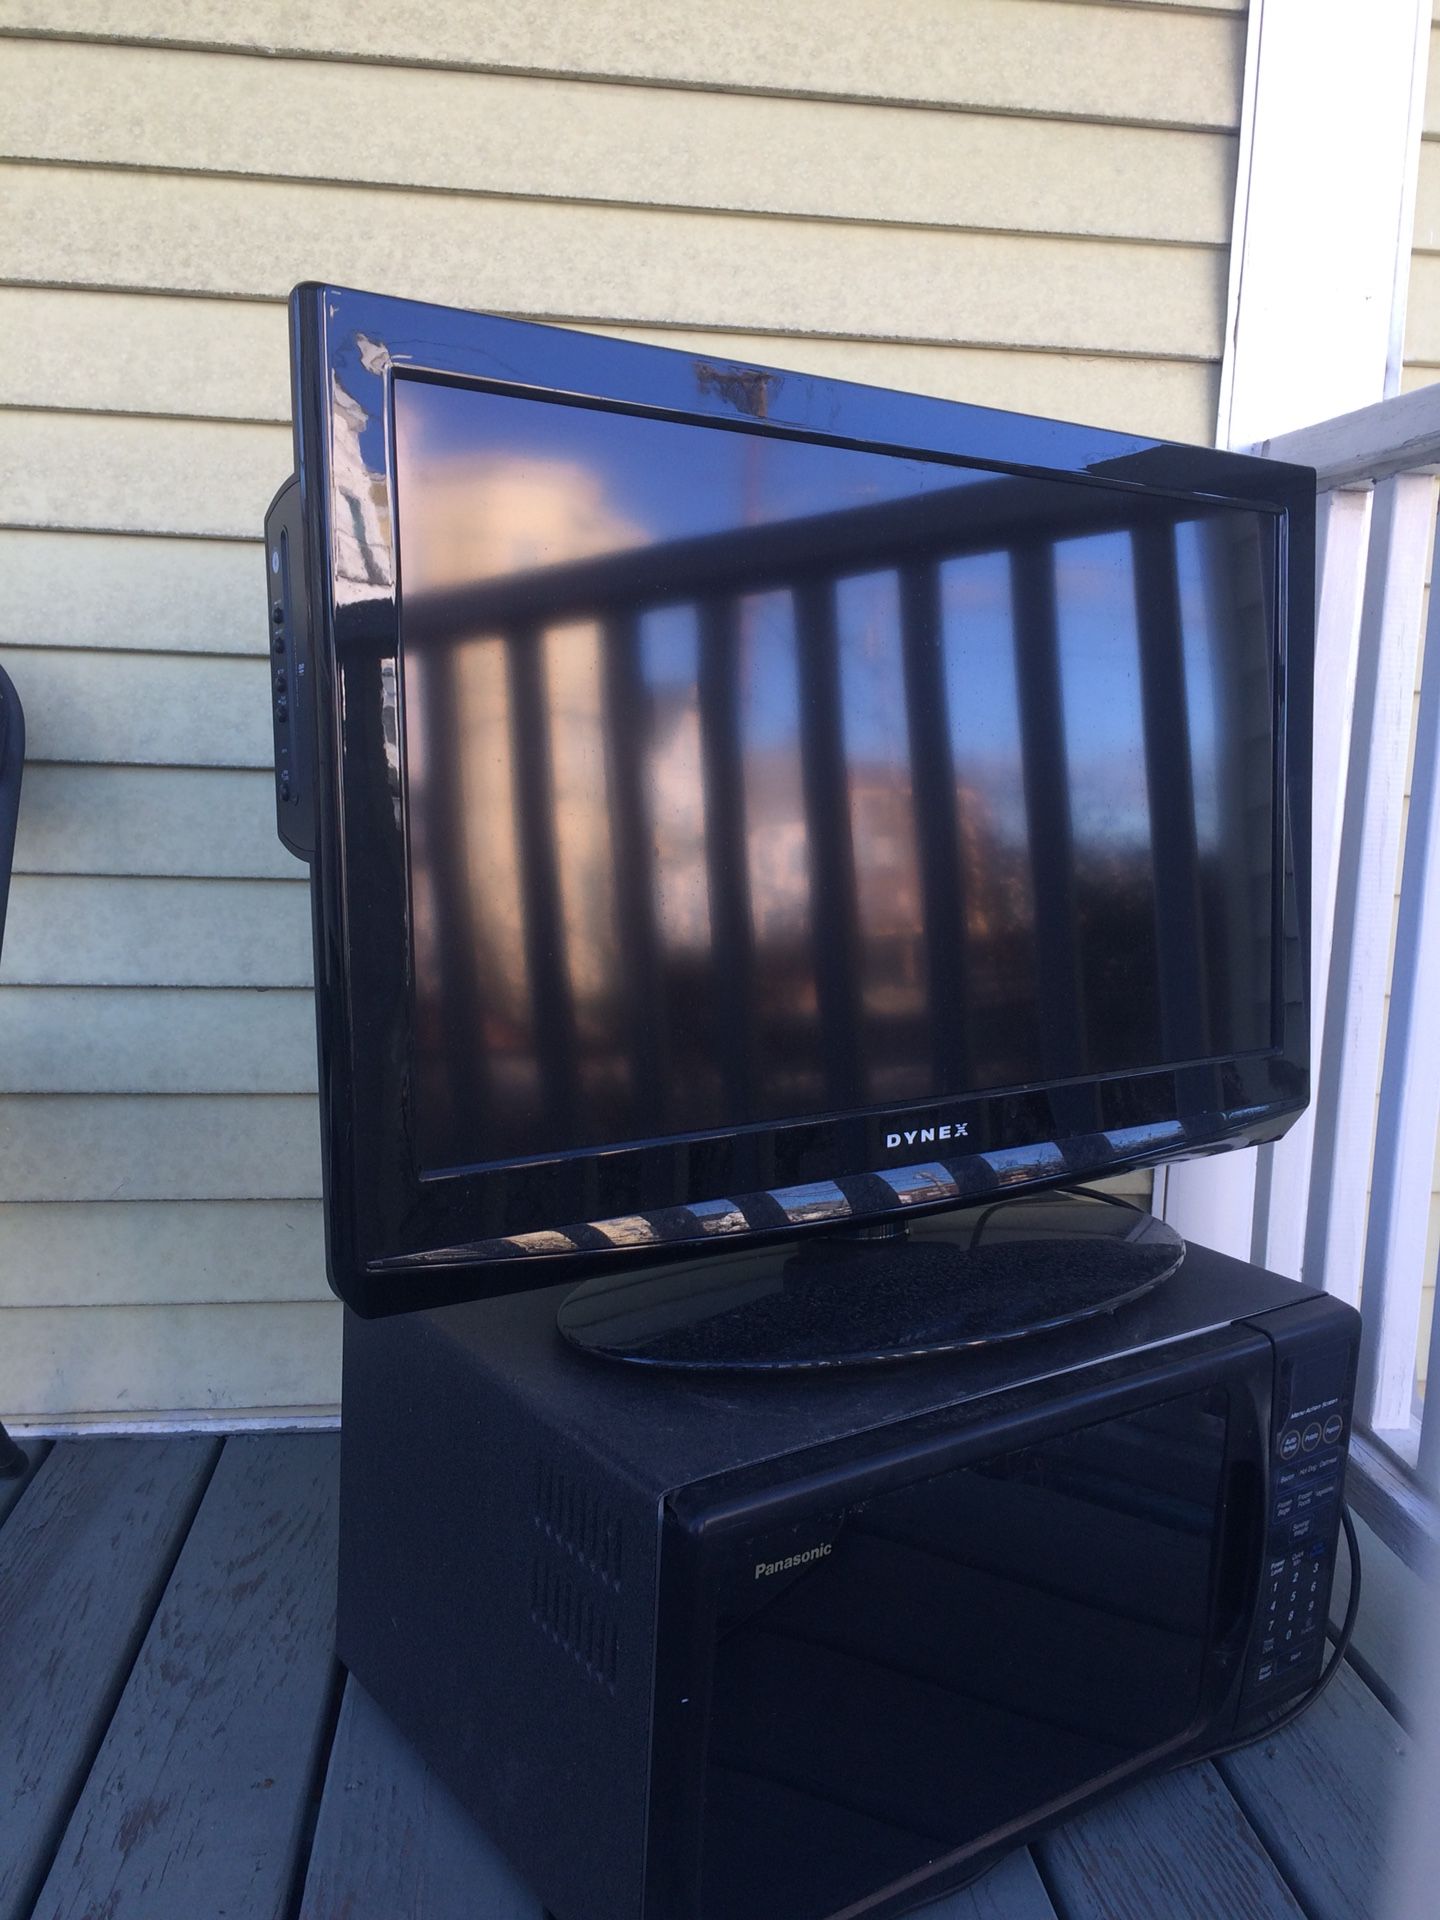 Free for parts not working tv and microwave